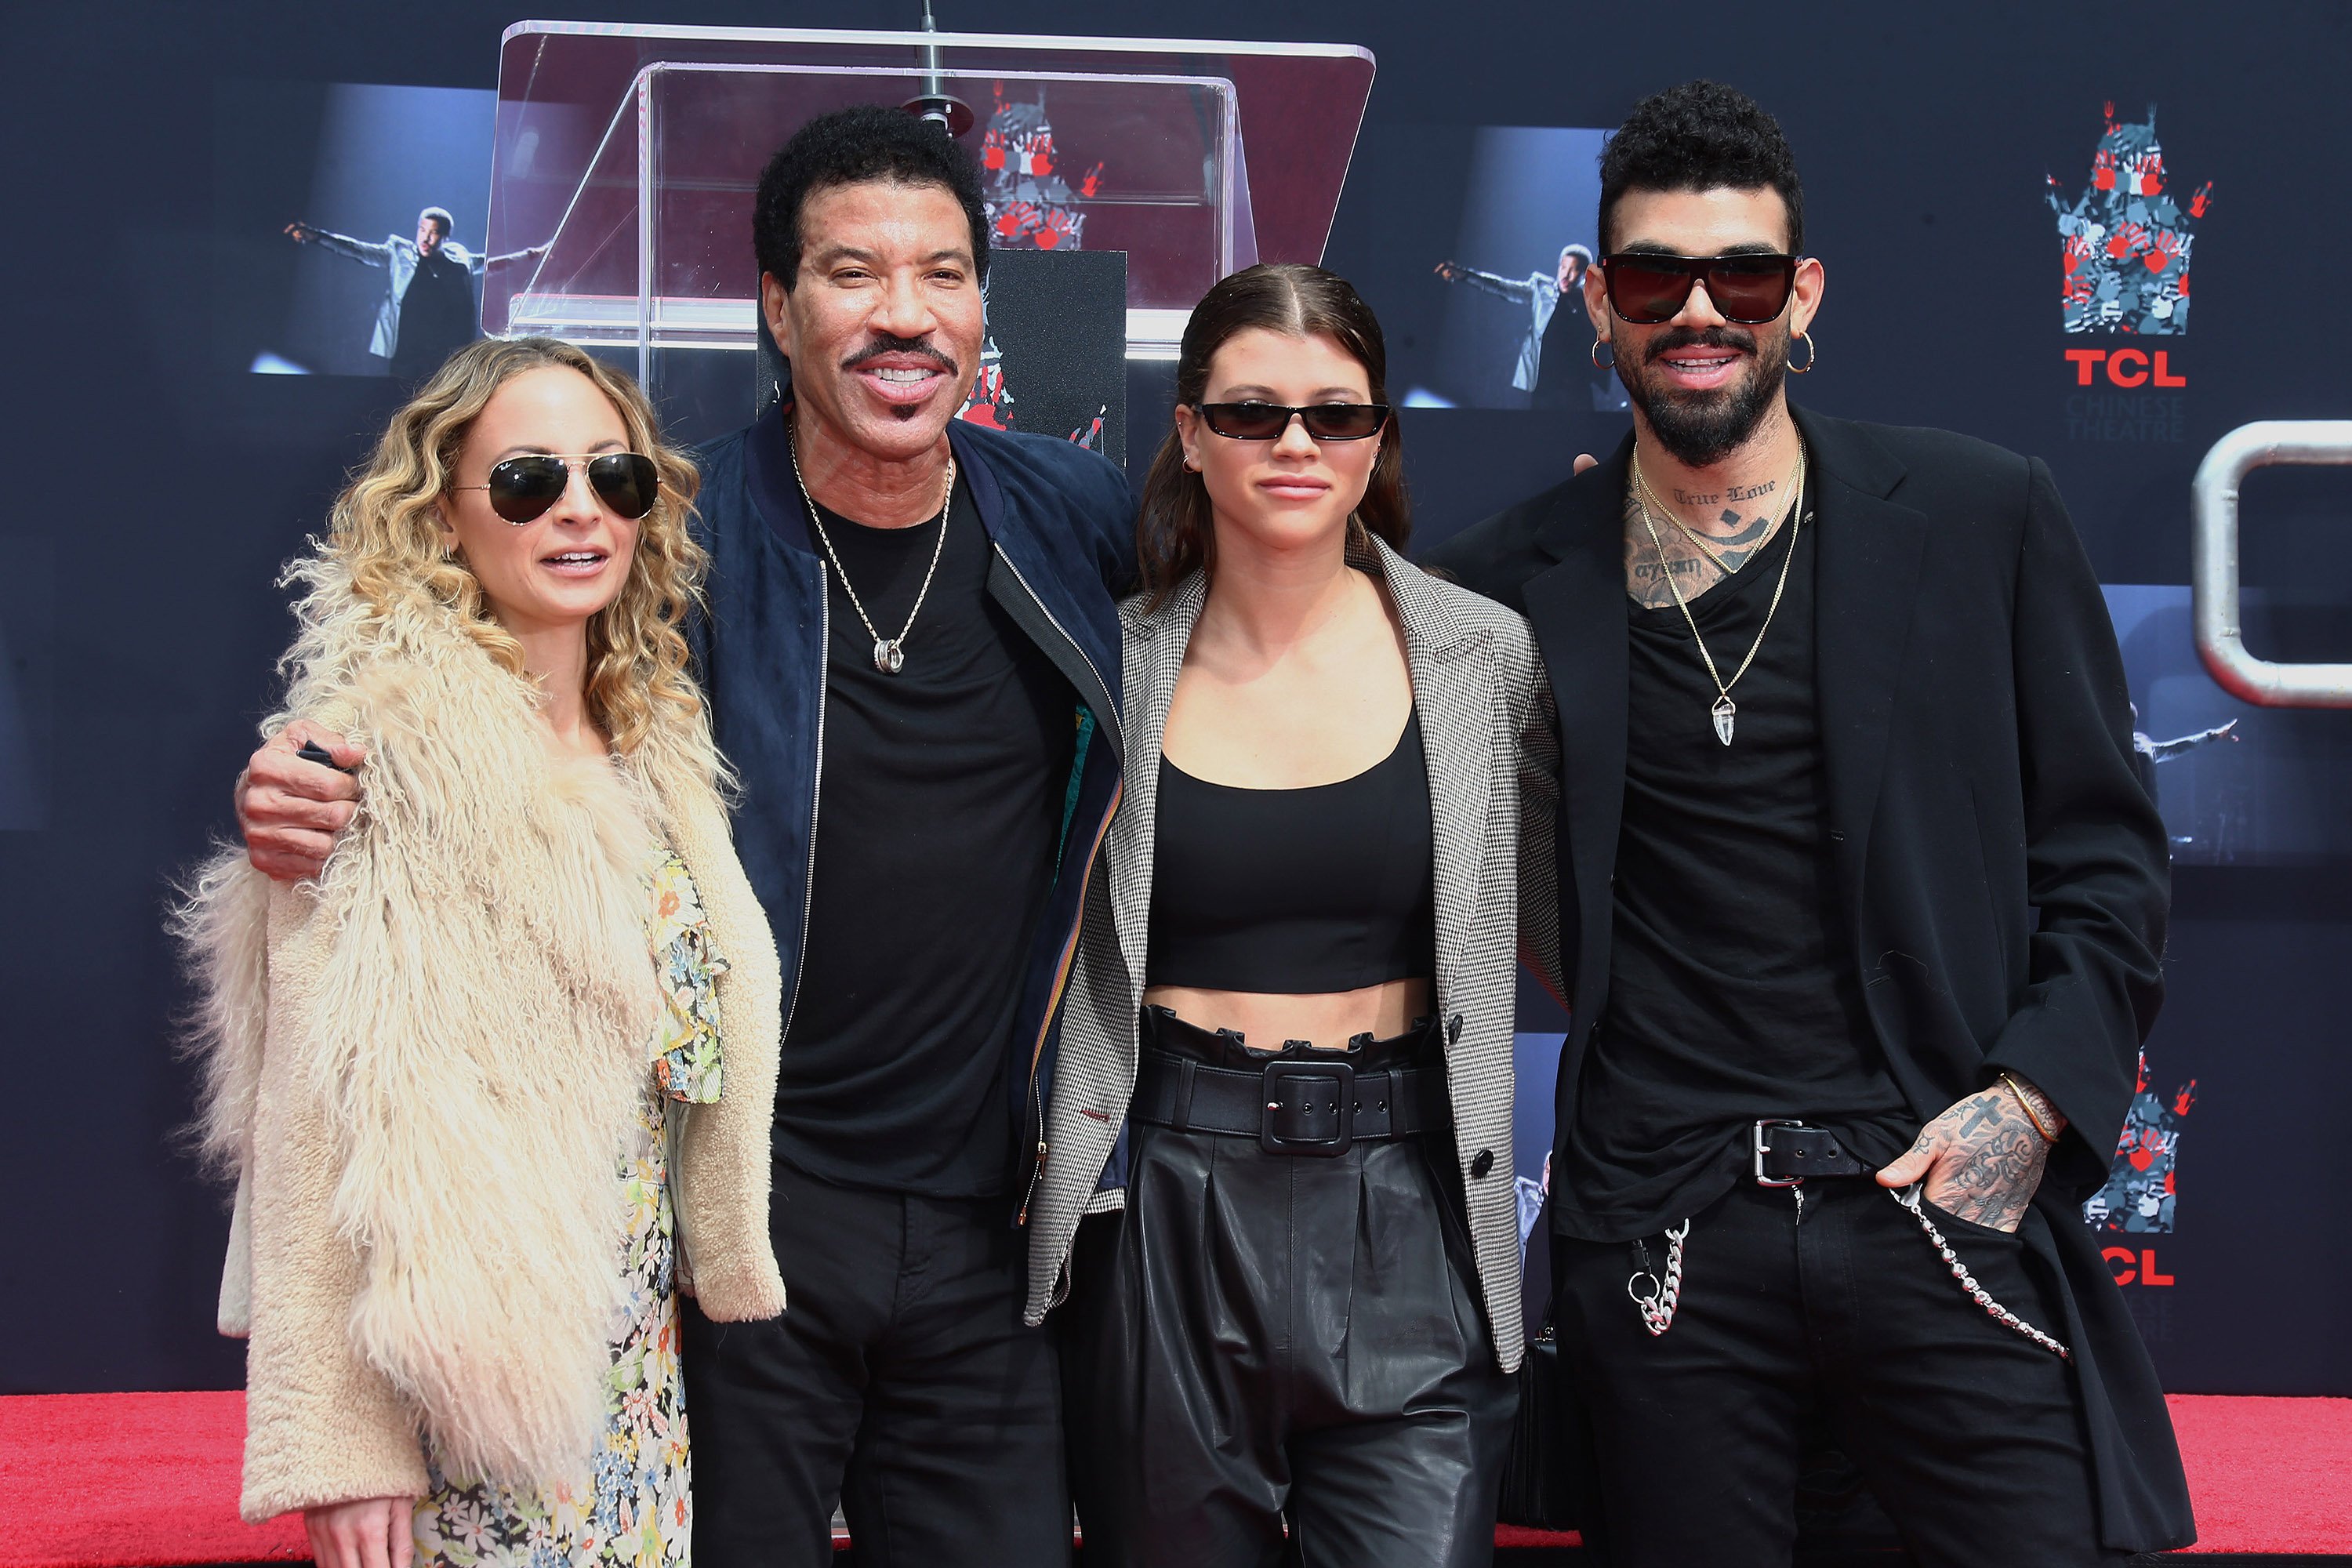 Nicole Richie, Lionel Richie, Sofia Richie and Miles Richie at the Lionel Richie Hand And Footprint Ceremony on March 7, 2018 | Photo: Getty Images